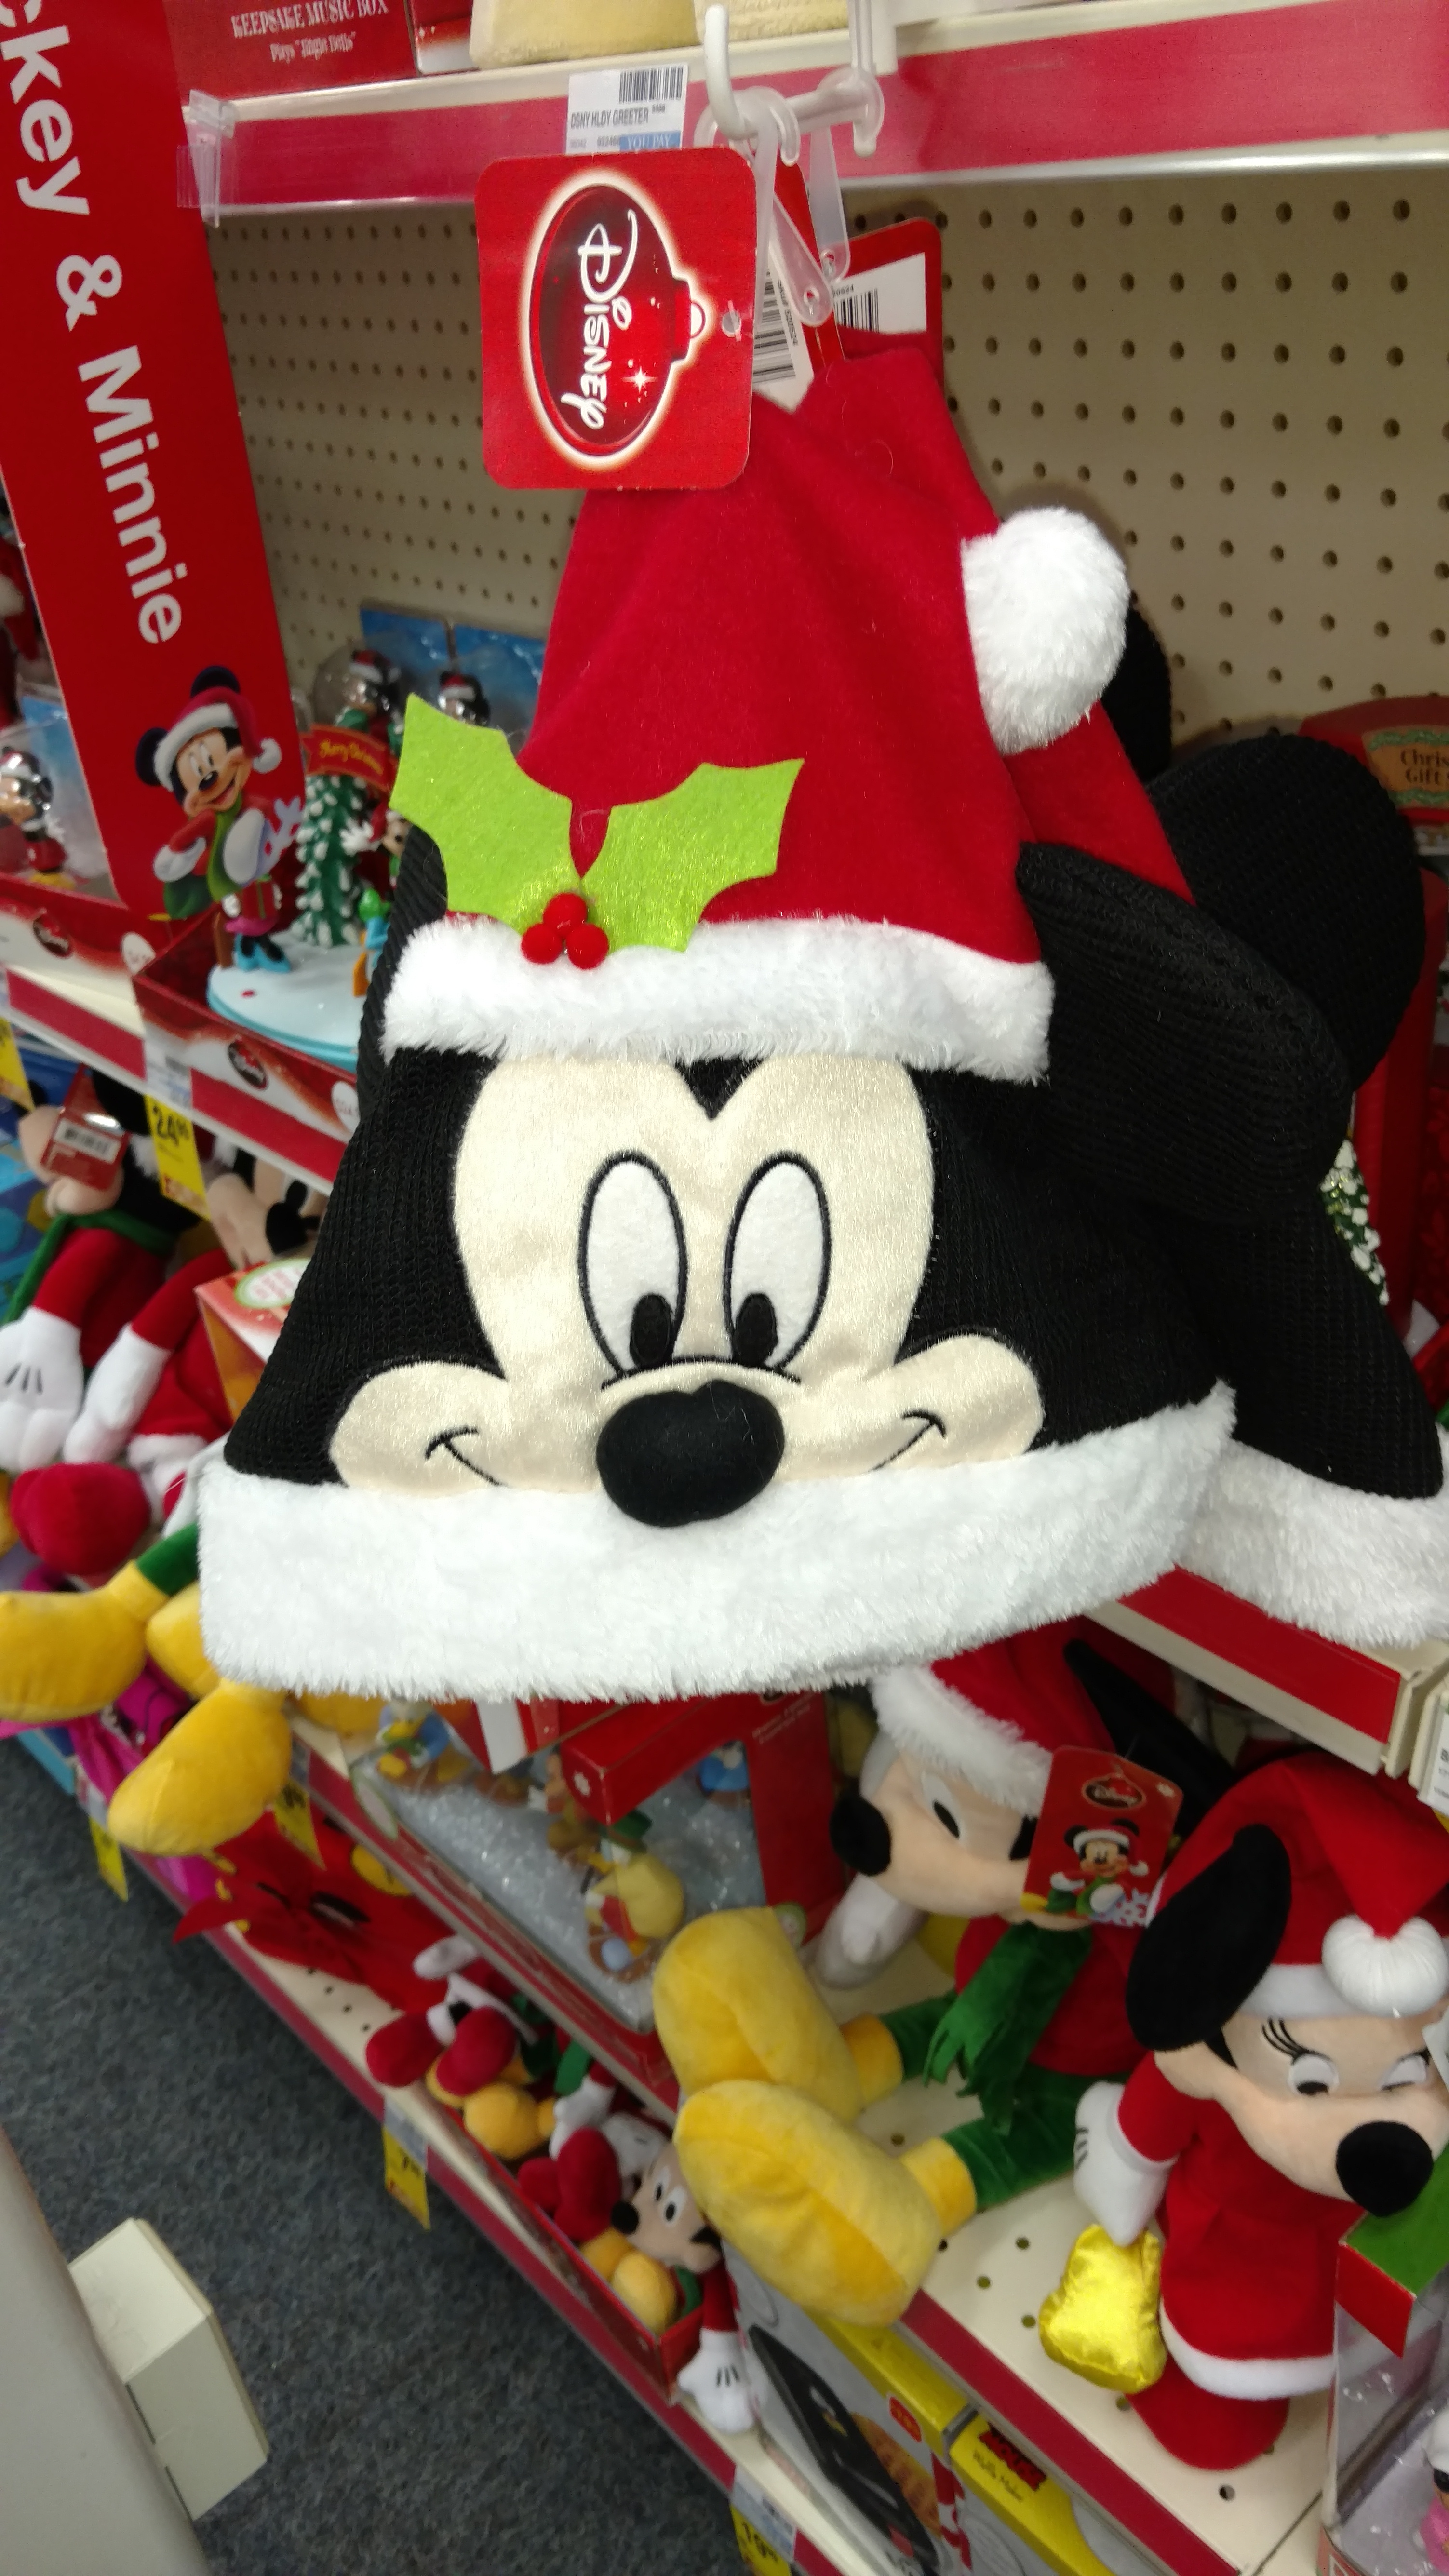 Disney Holiday Gifts at the Corner of Happy and Healthy